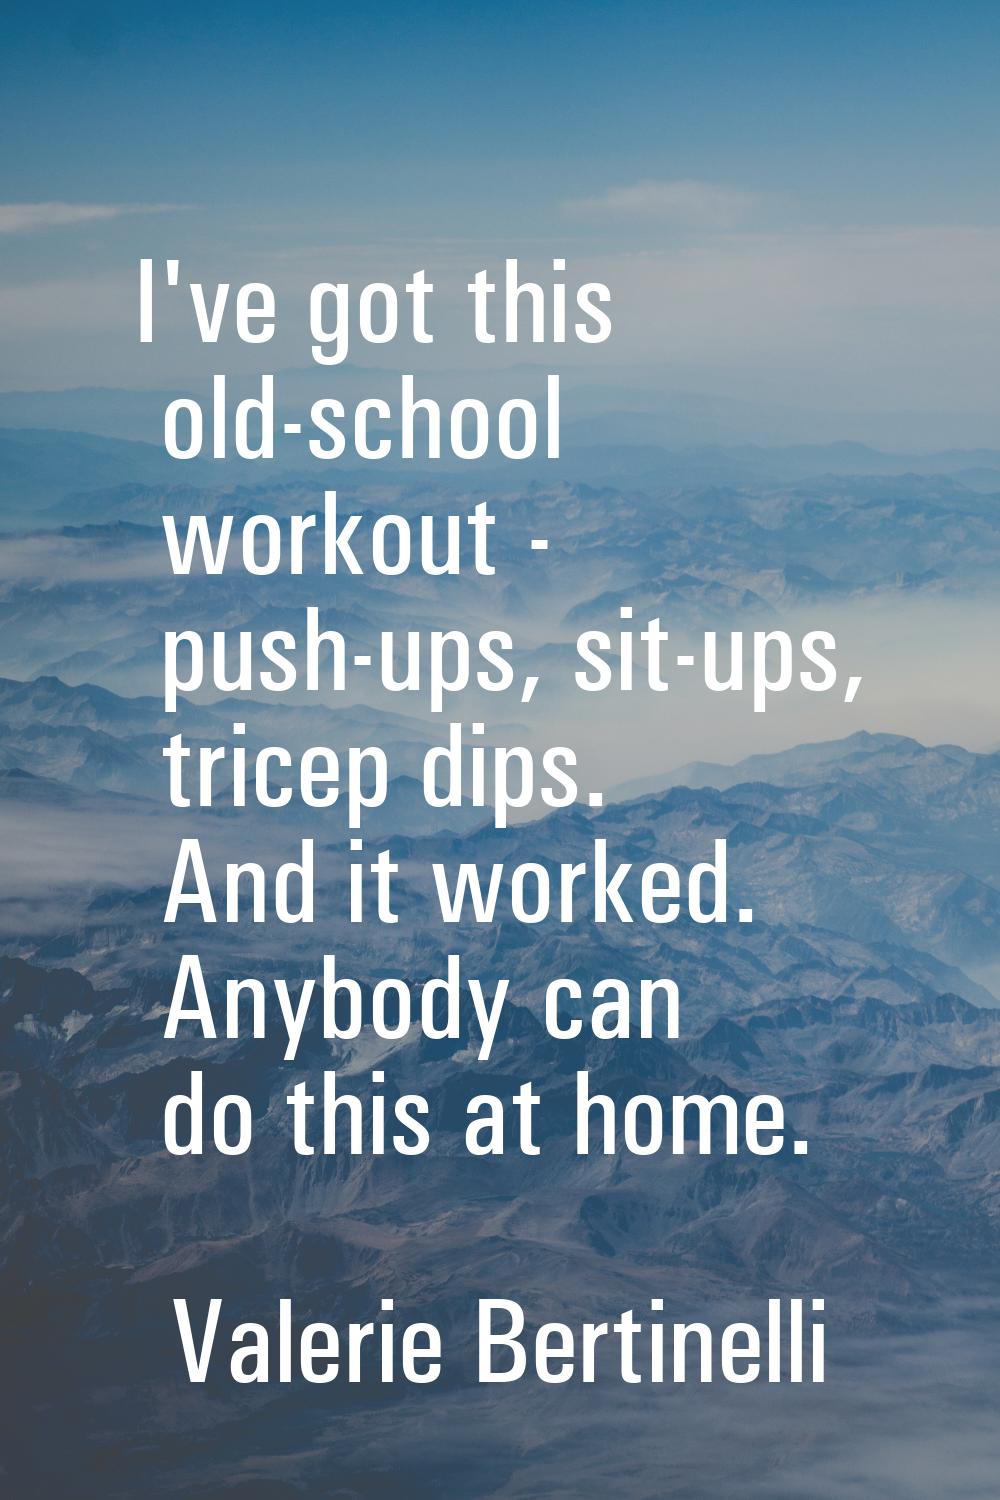 I've got this old-school workout - push-ups, sit-ups, tricep dips. And it worked. Anybody can do th